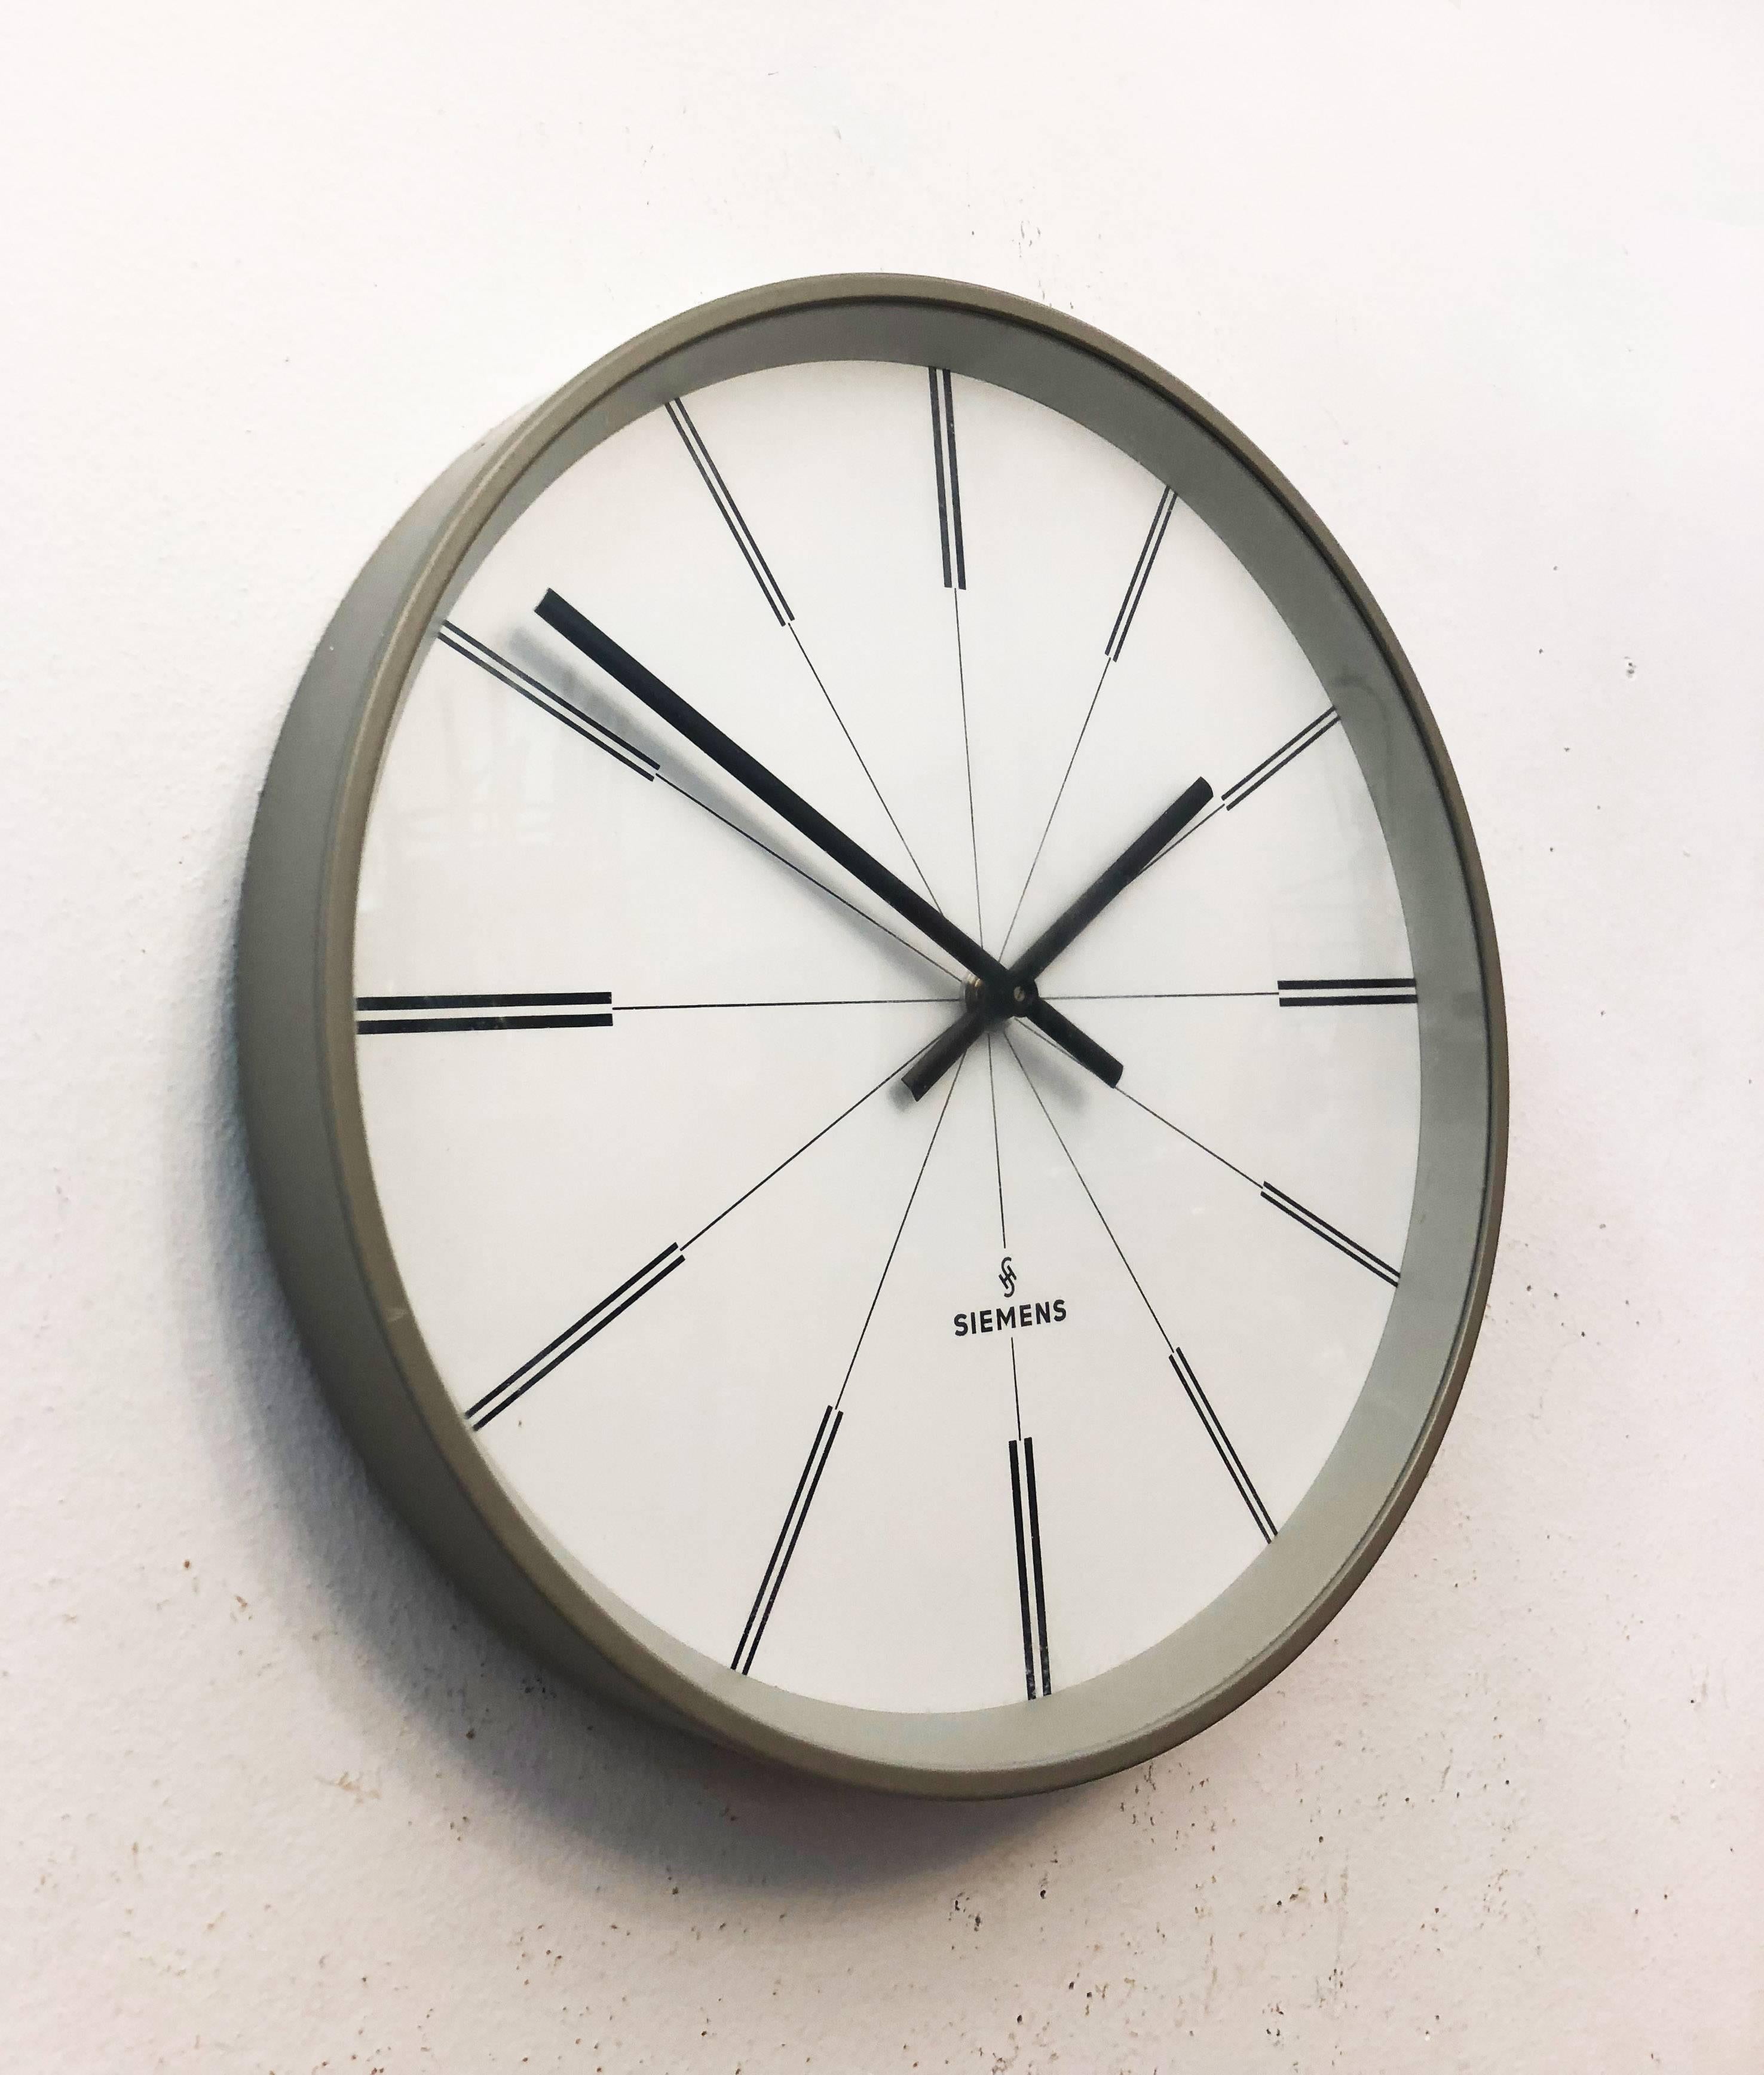 Steel painted with glass front made in Germany in the 1960s.
Formerly a slave clock, it is now fitted with a modern quartz movement with a battery. Delivery time about 2 weeks.